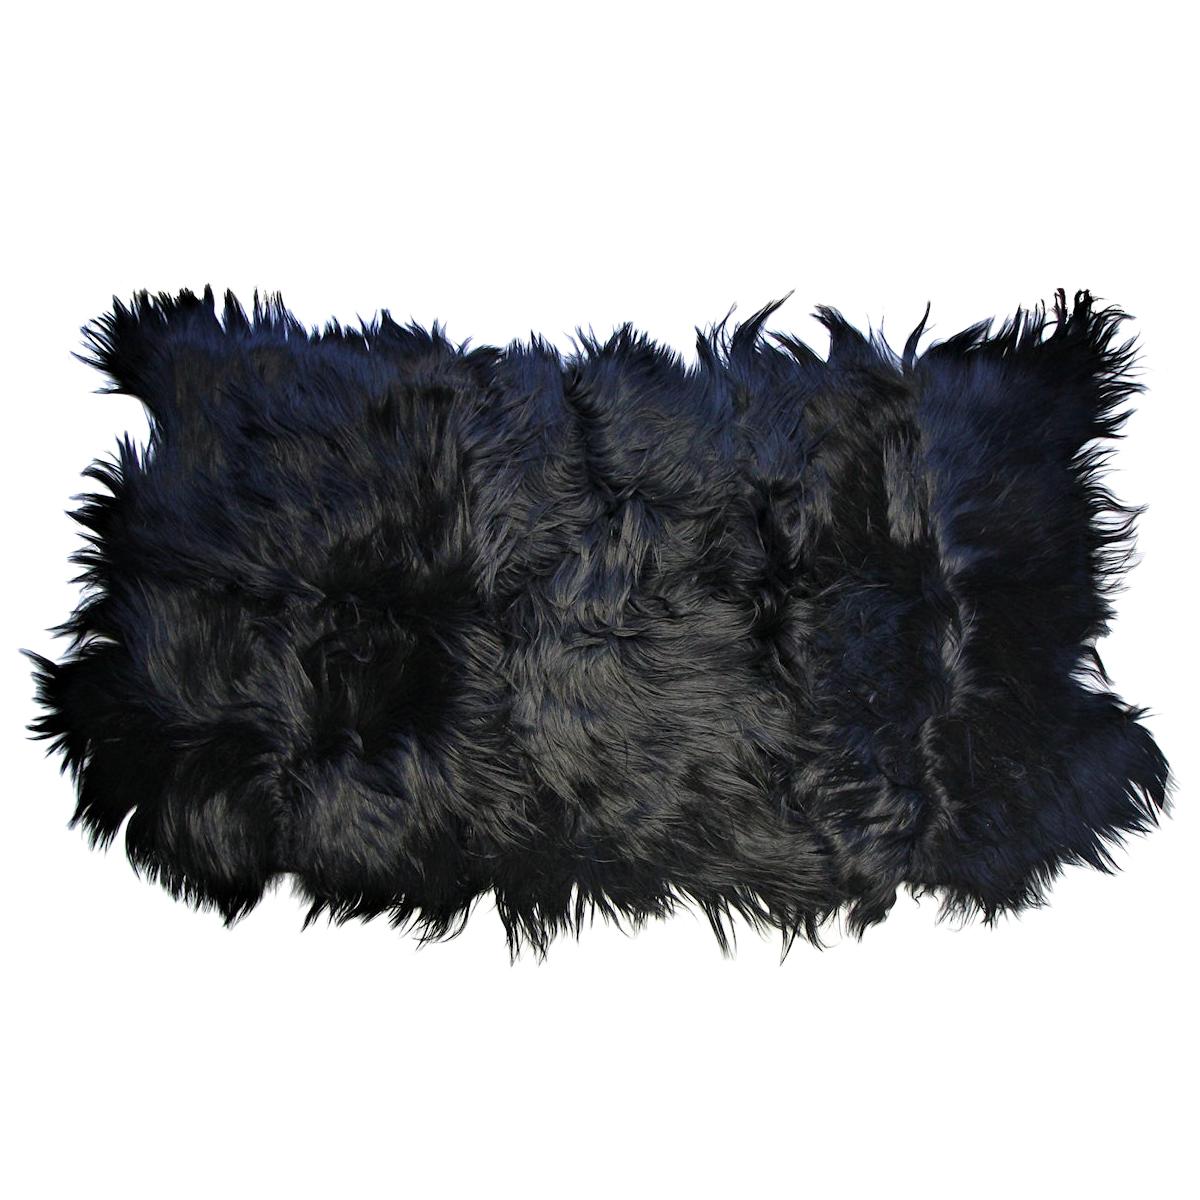 Black Goat Hair Rug Throw, Customize to Any Size